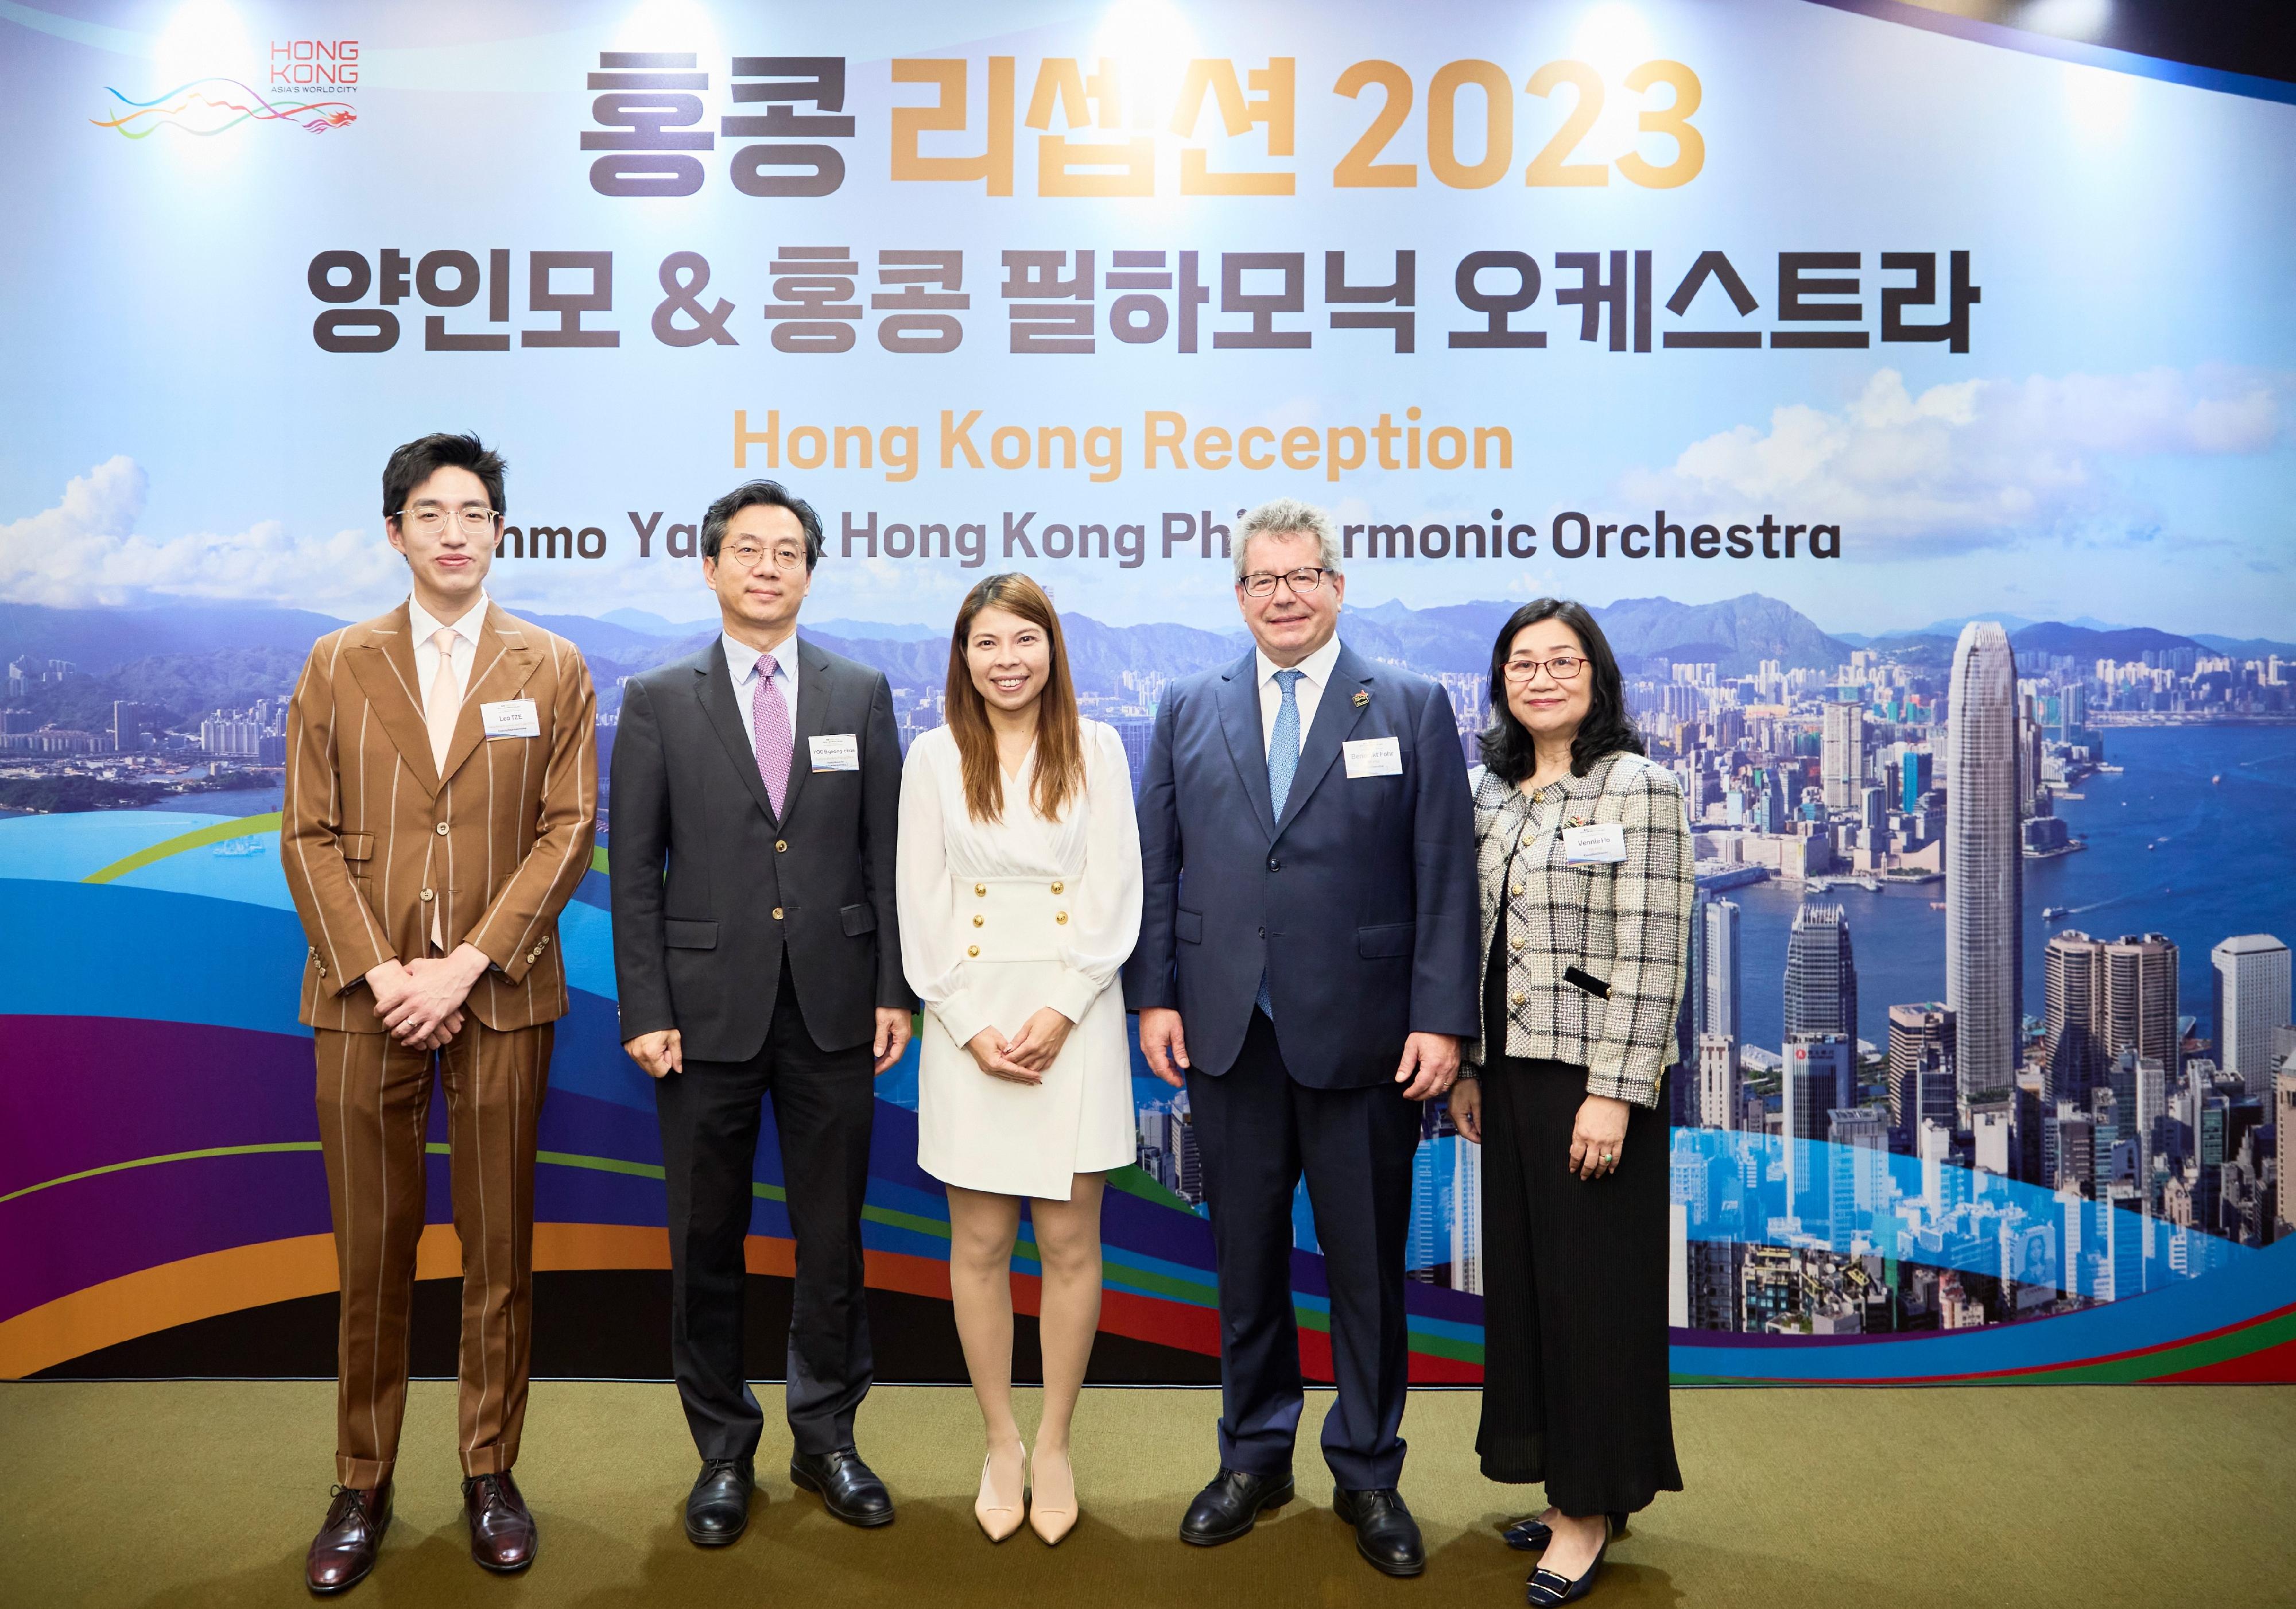 The Hong Kong Philharmonic Orchestra (HK Phil) performed a concert at the Seoul Arts Center in Seoul, Korea, today (October 28). At a reception before the concert, the Principal Hong Kong Economic and Trade Representative (Tokyo), Miss Winsome Au (centre), is pictured with the Chief Executive of the HK Phil, Mr Benedikt Fohr (second right); the Executive Director of the HK Phil, Ms Vennie Ho (first right); Deputy Minister for Culture and Arts Policy, Ministry of Culture, Sports and Tourism, Korea, Mr Yu Byung-chae(second left); and the Deputy Hong Kong Economic and Trade Representative (Tokyo), Mr Leo Tze (first left).